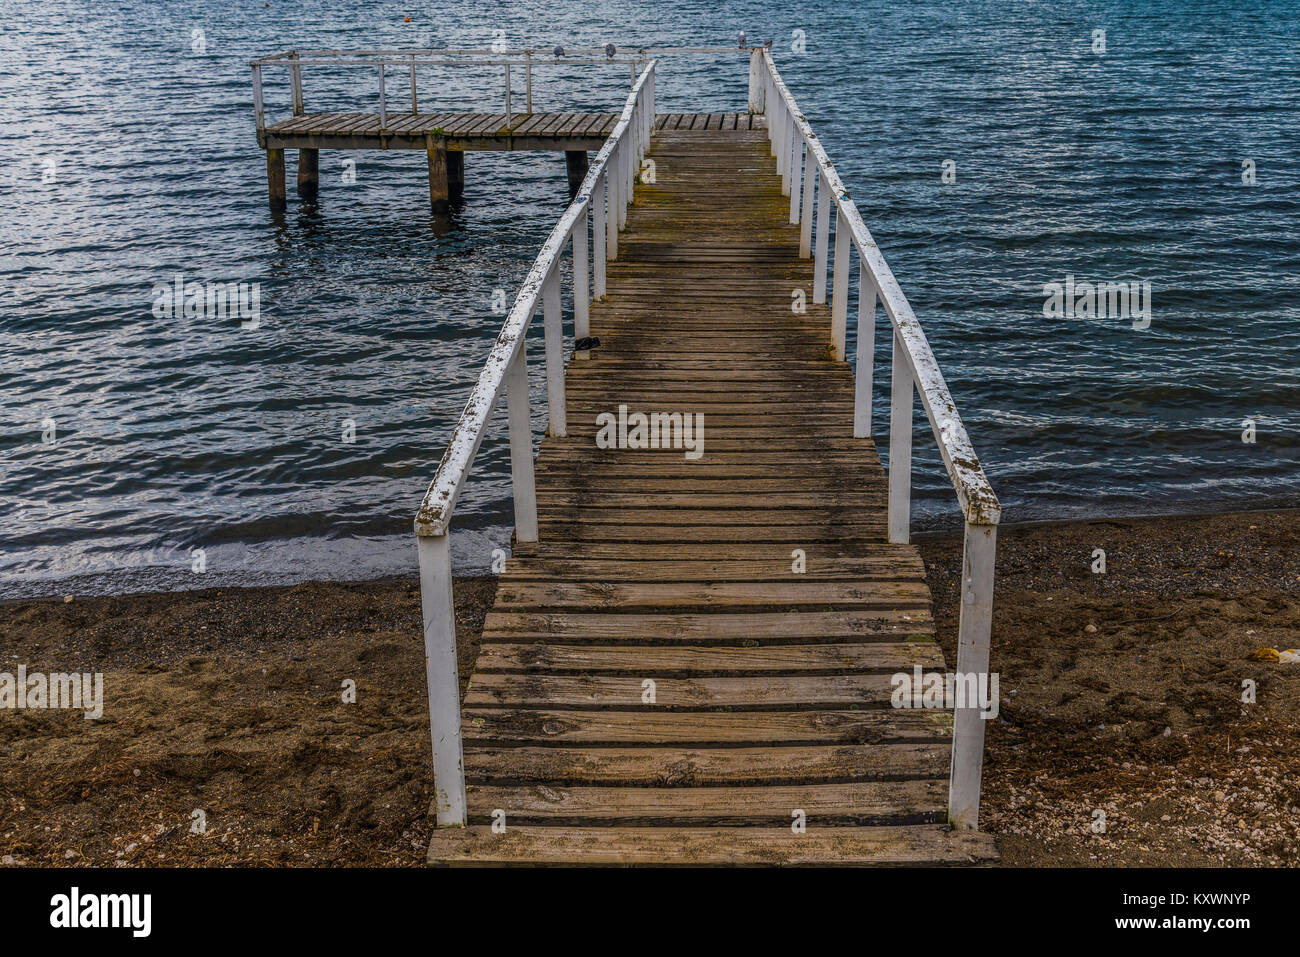 warm sources runnning into Lake Taupo, New Zealand Stock Photo